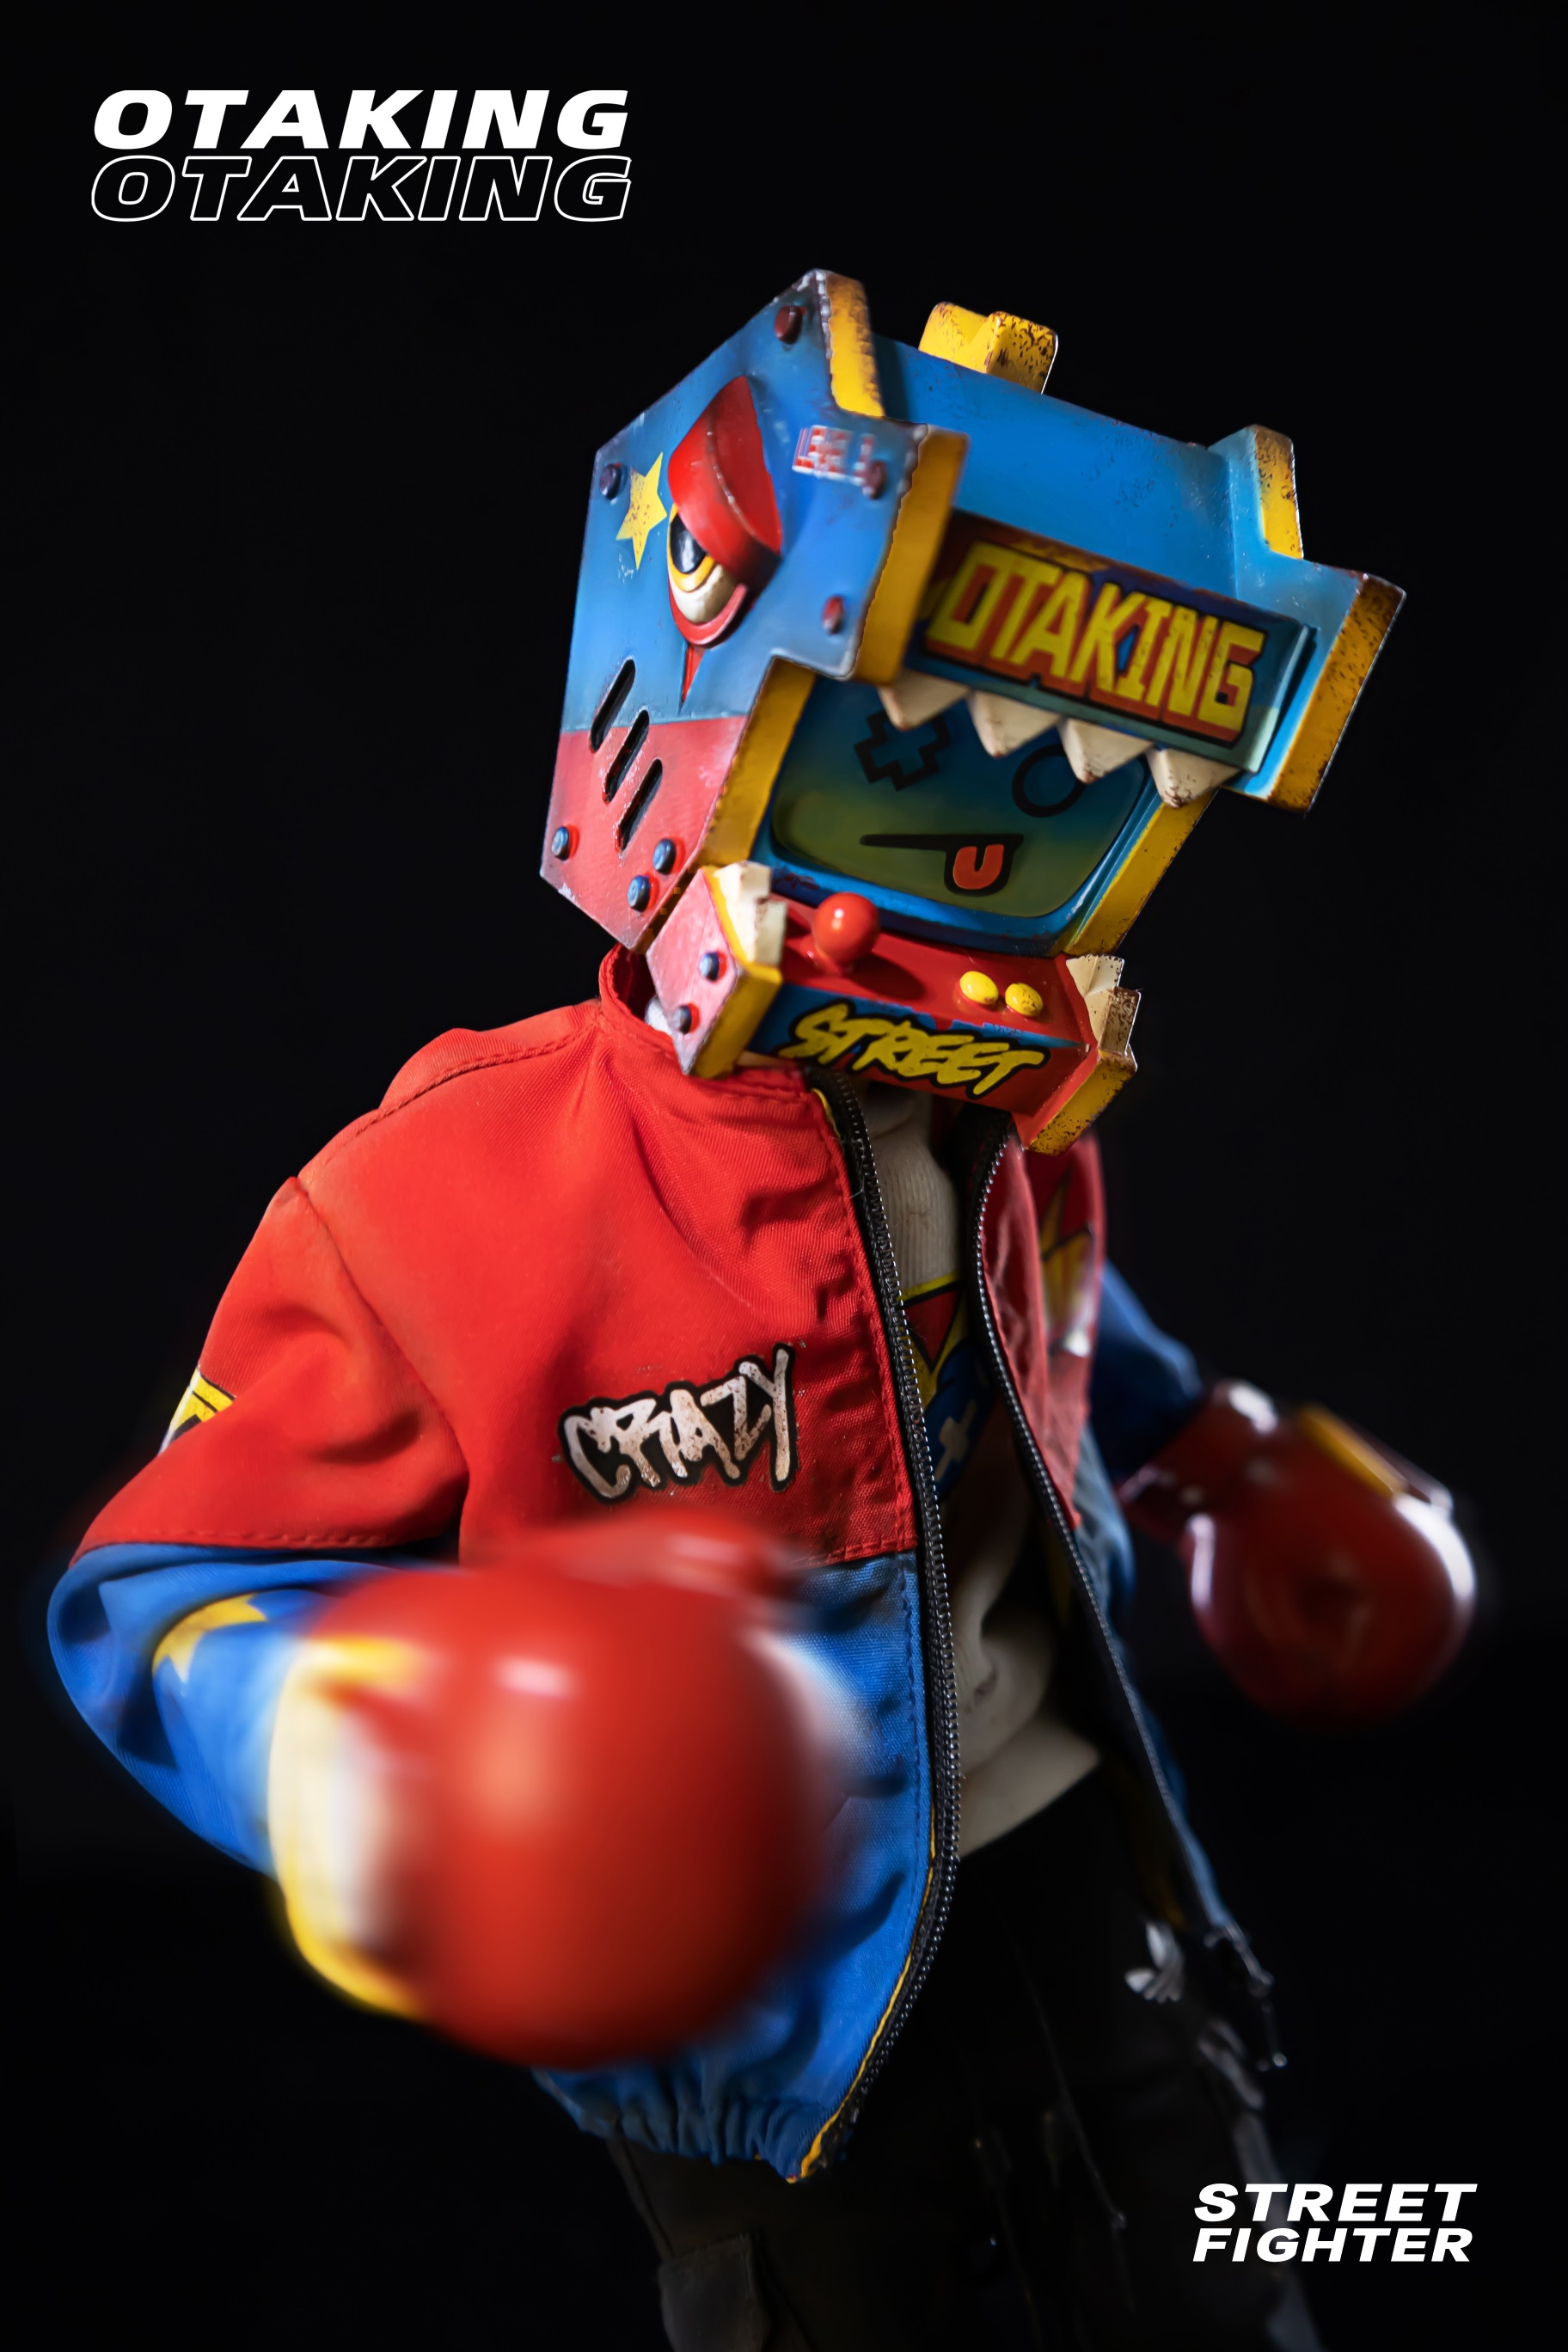 Person in OTAKING - Street fighter robot garment and mask, with logo and sign details, holding a toy.